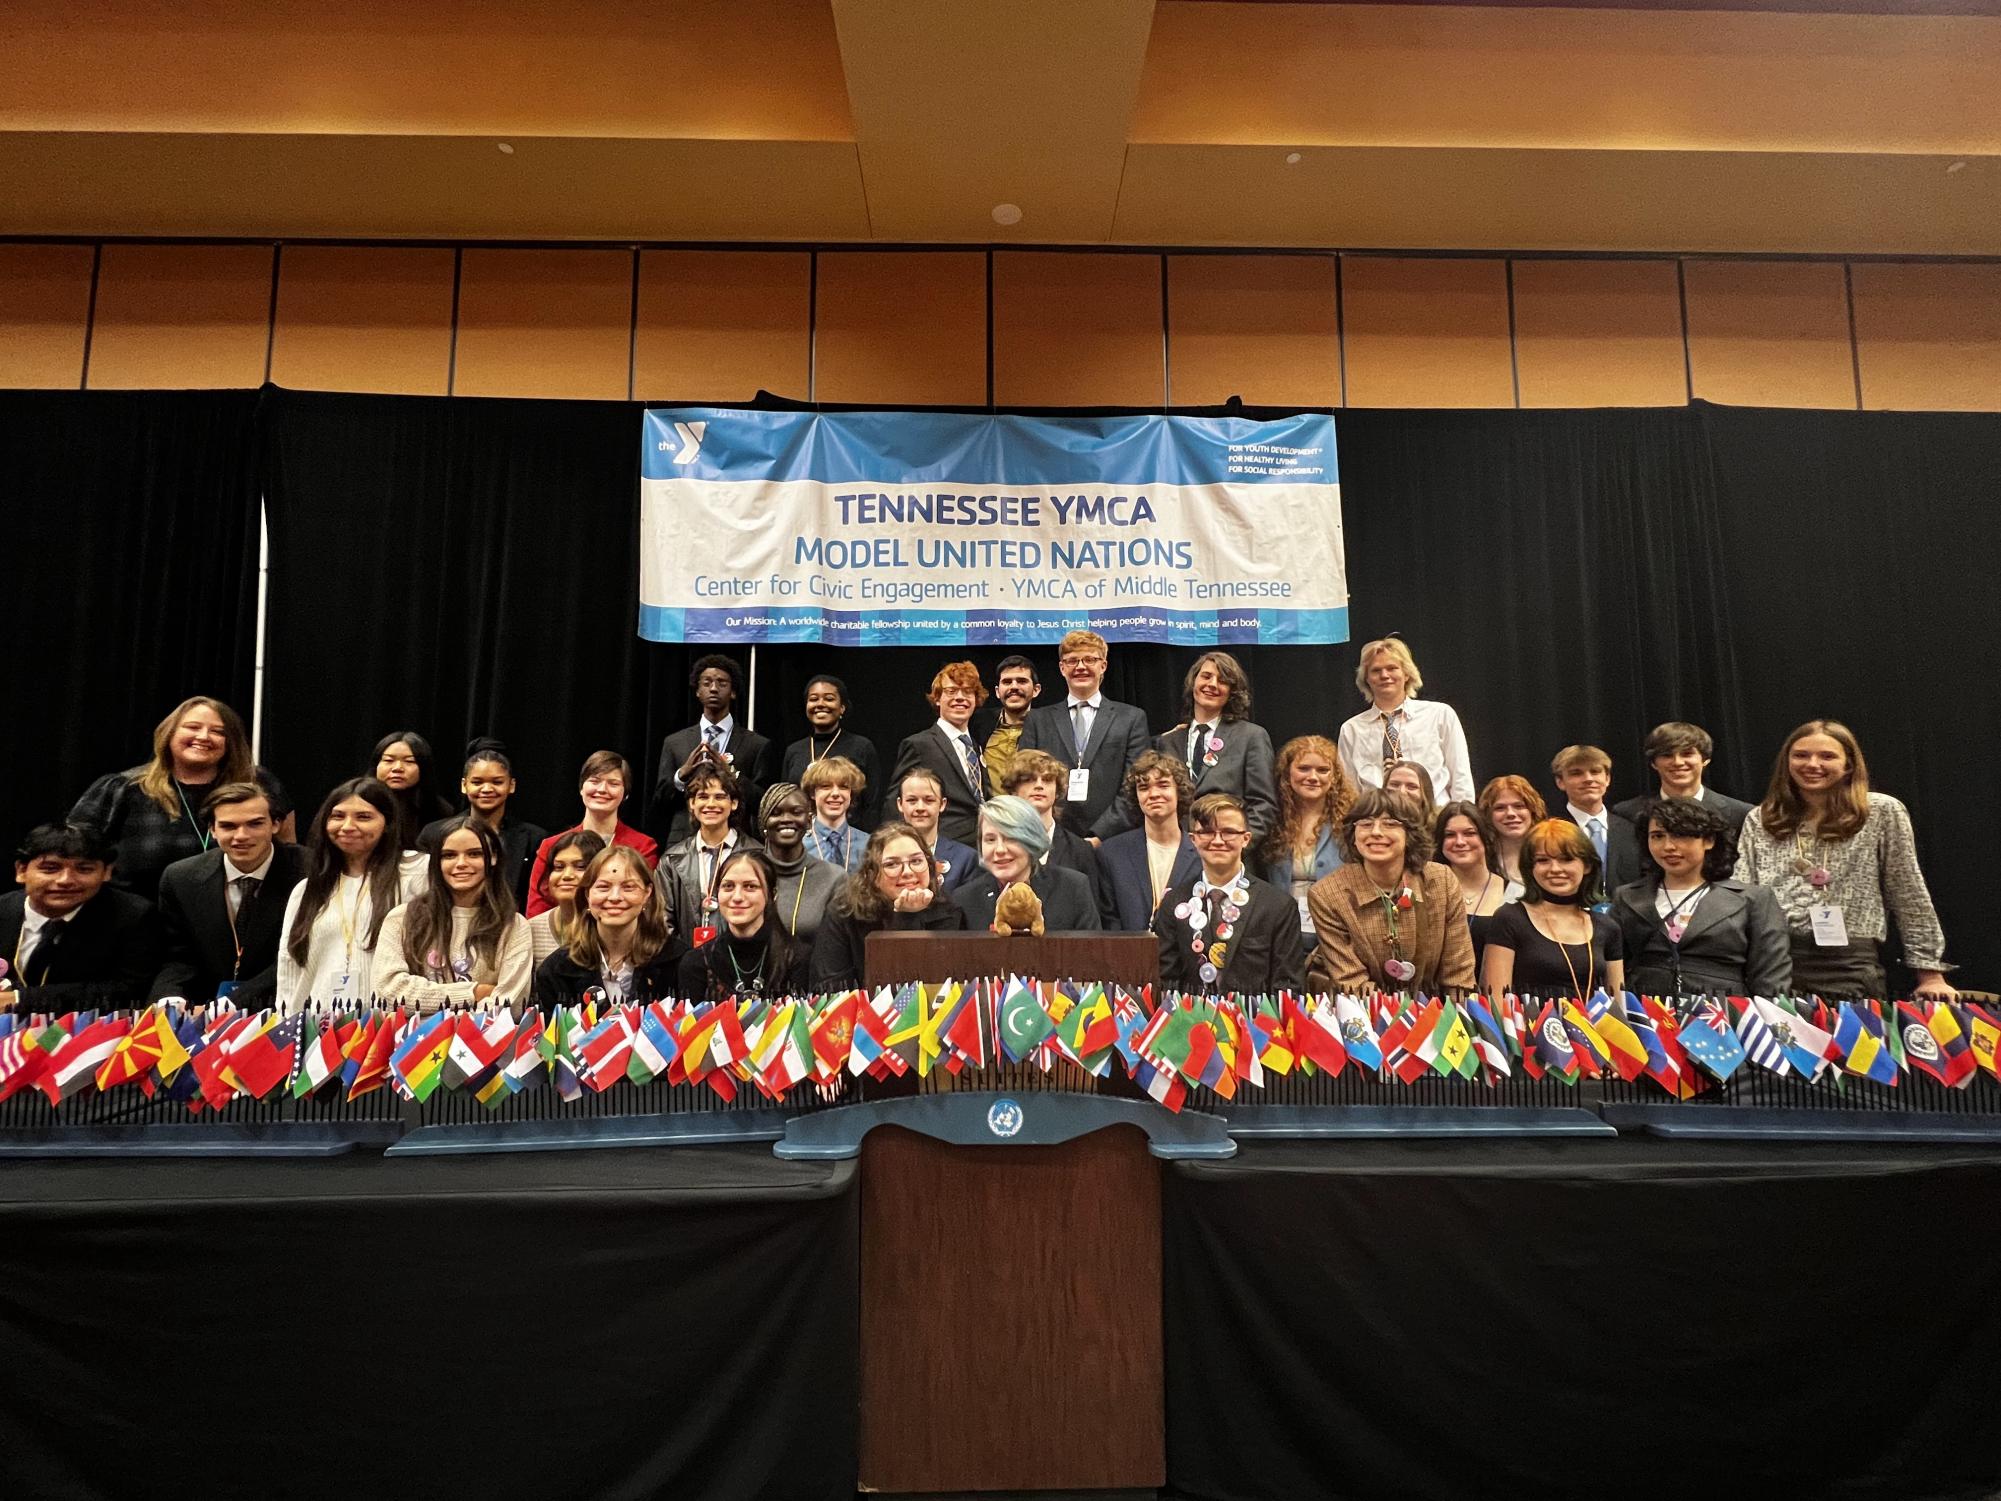 Hillsboro+Students+Attend+Annual+YMCA+Model+United+Nations+Conference